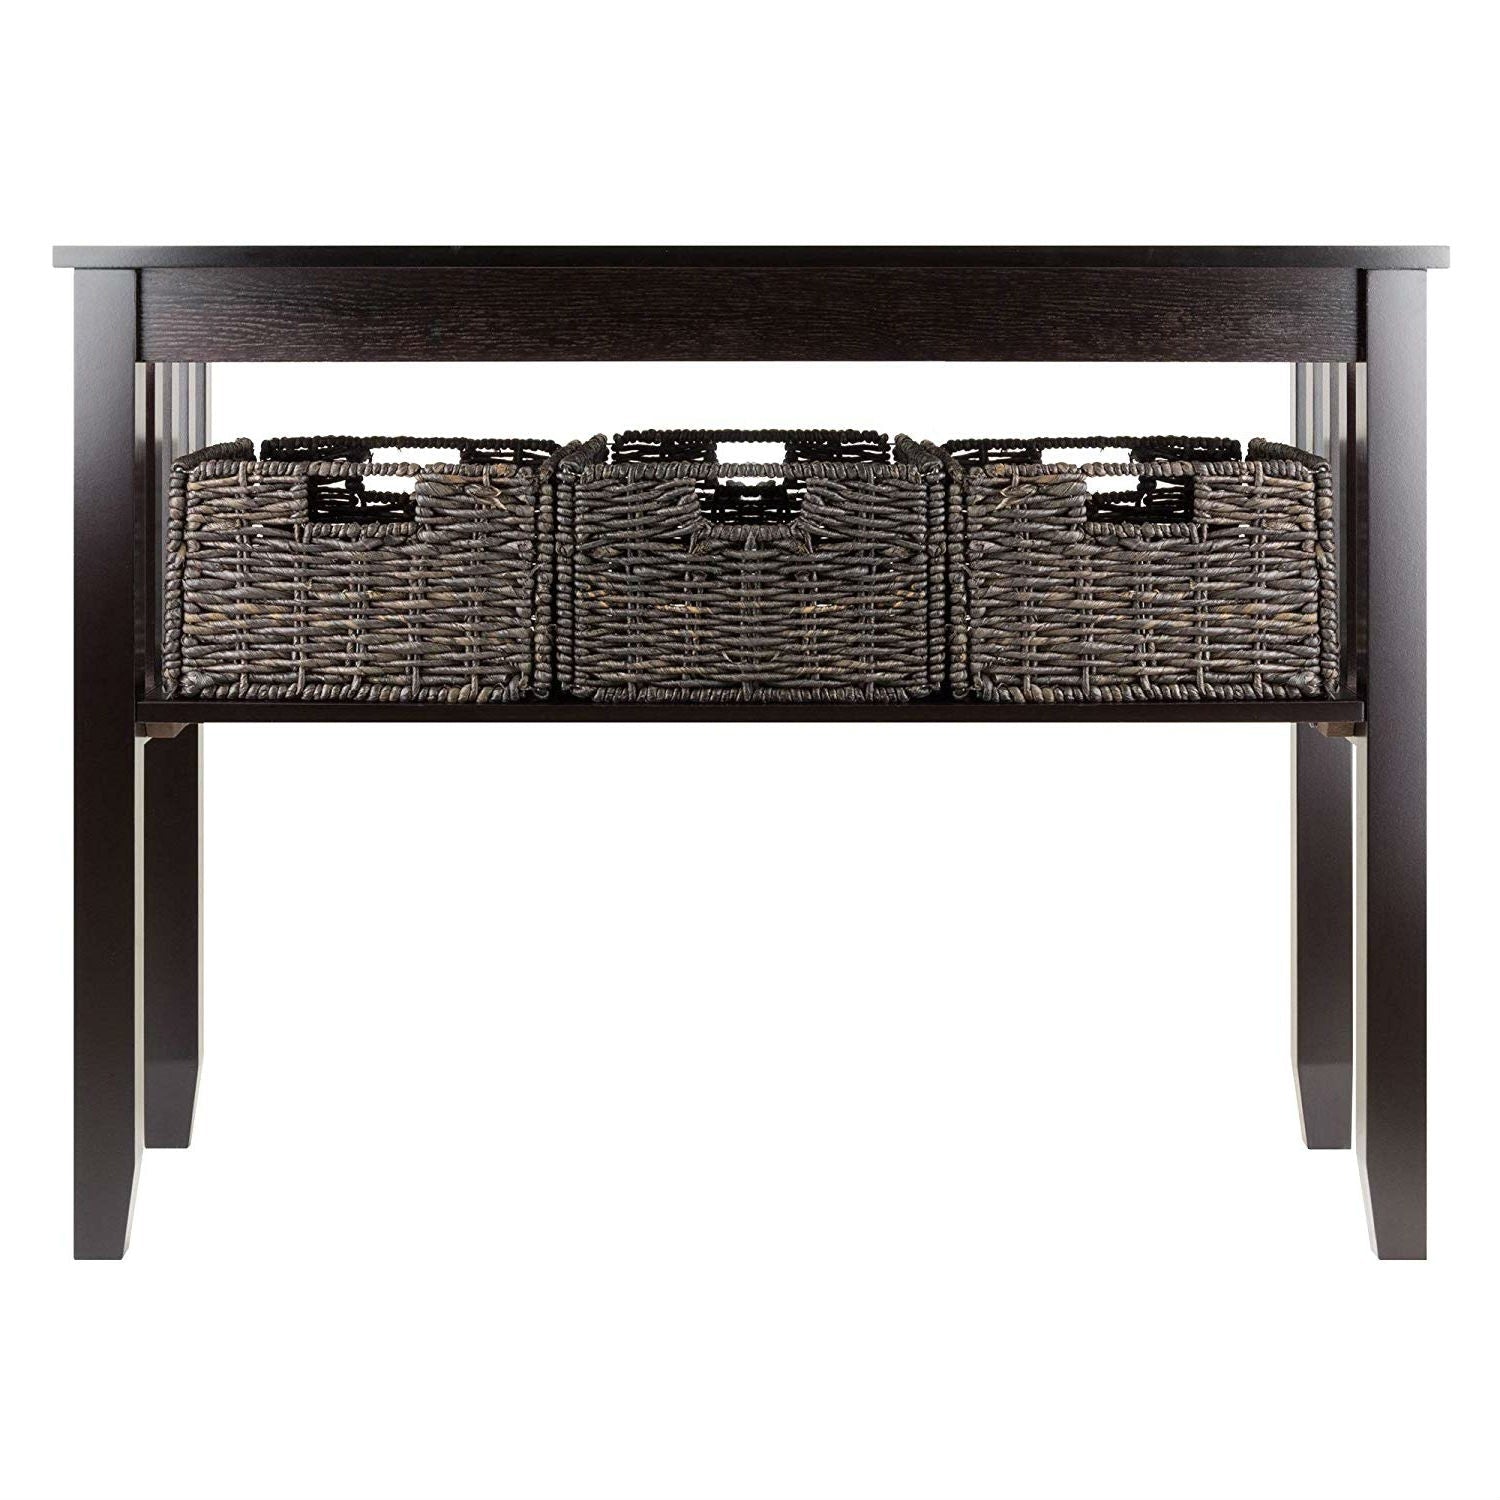 Living Room > Bookcases - Espresso 2 Tier Entryway Hall Console Table With 3 Storage Baskets